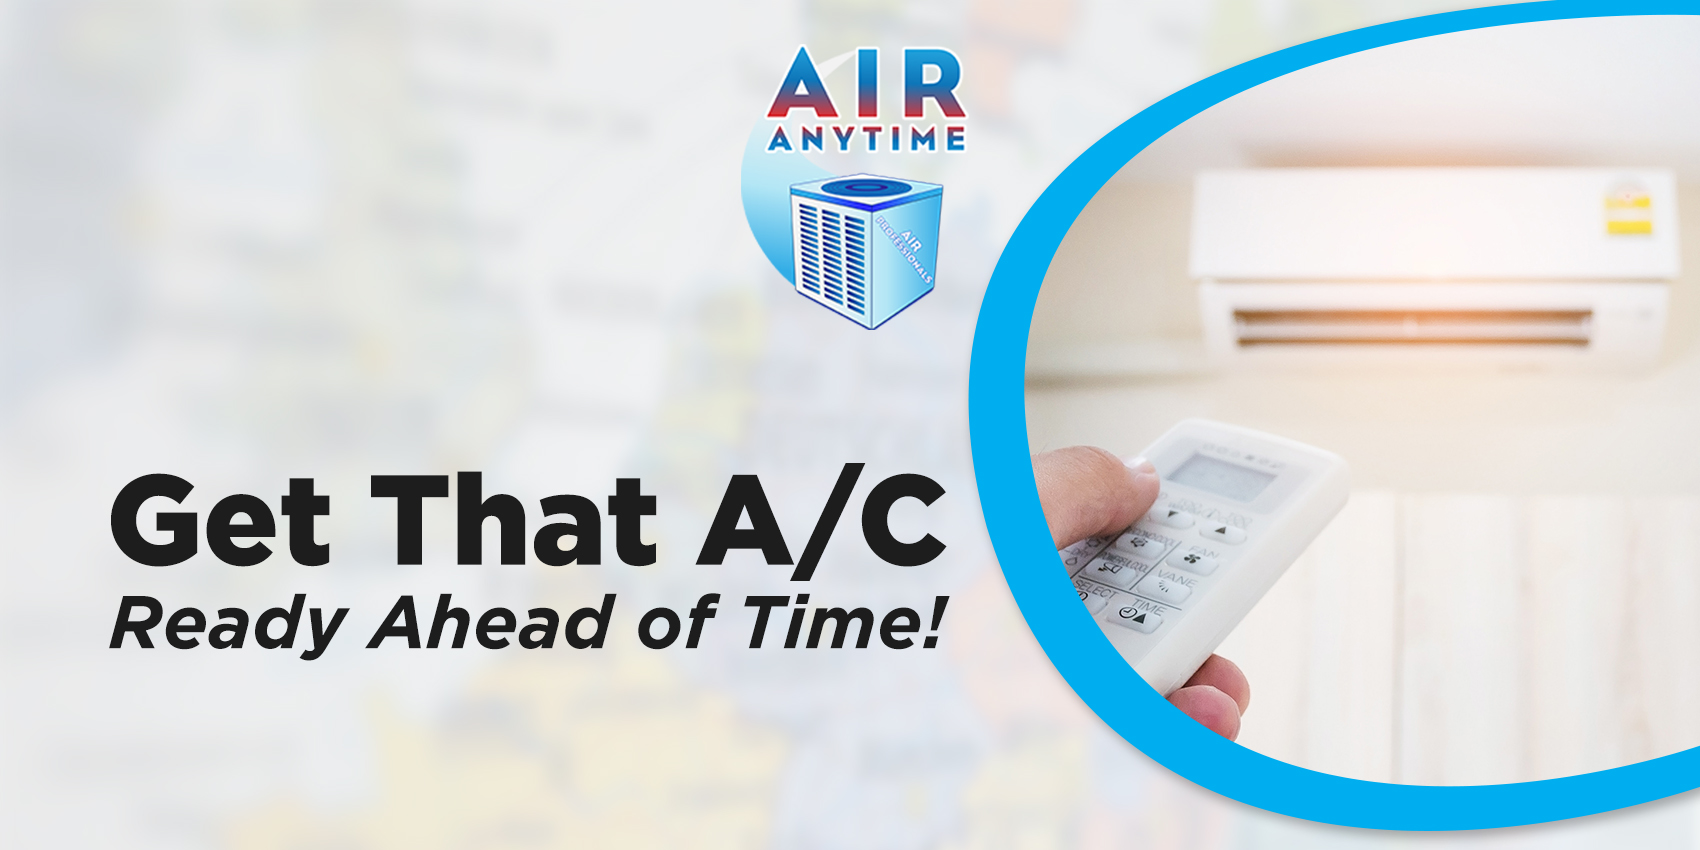 Get That A/C Ready Ahead of Time!